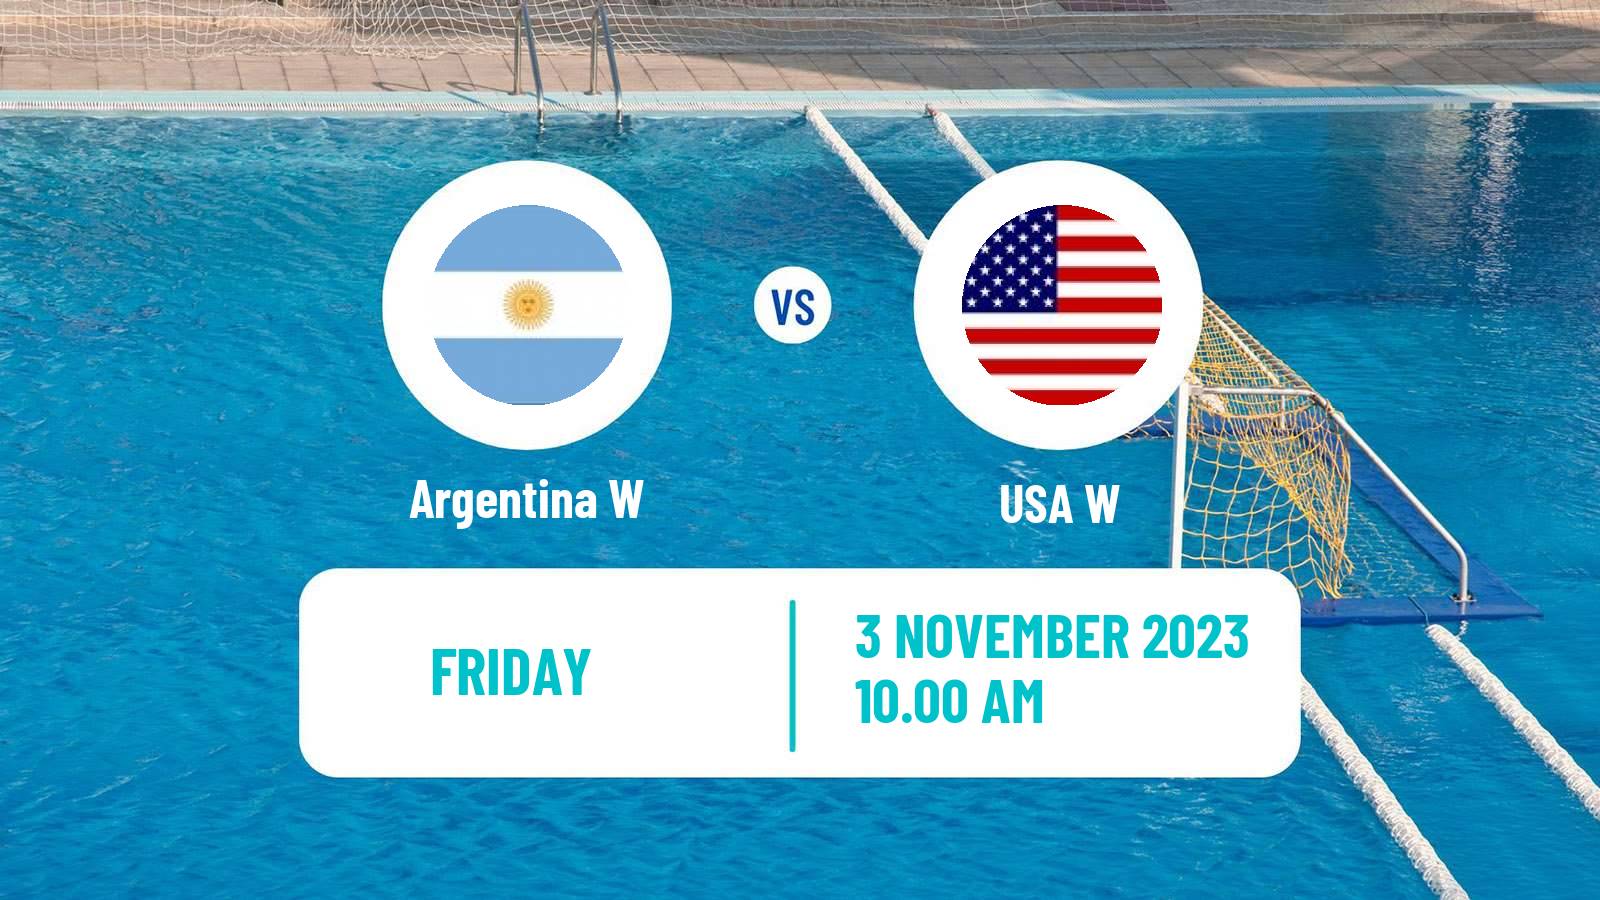 Water polo Pan American Games Water Polo Women Argentina W - USA W